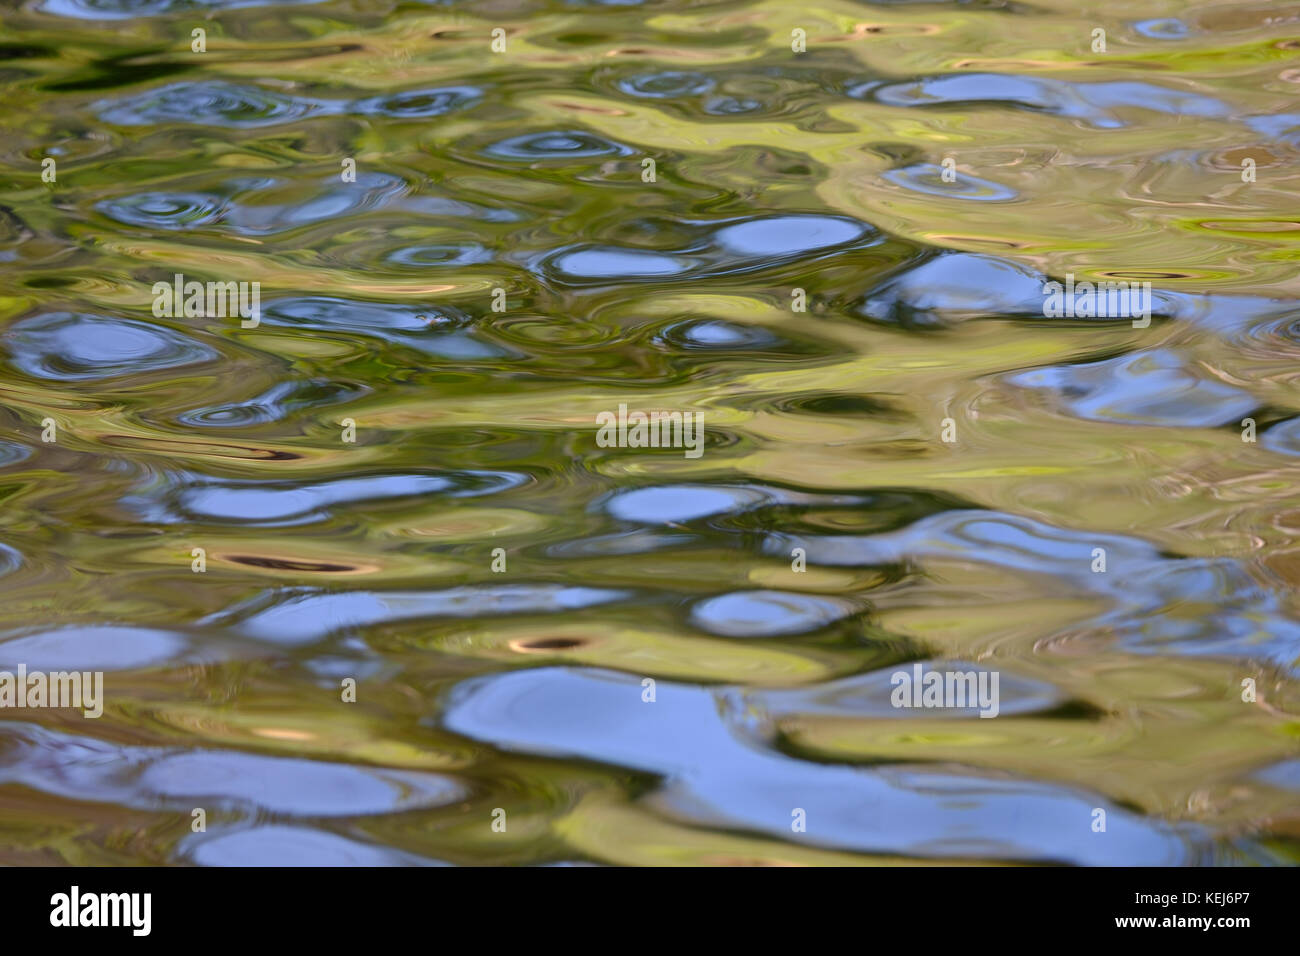 Abstract swirling pattern formed by sky and trees reflected in the surface of rippling water Stock Photo